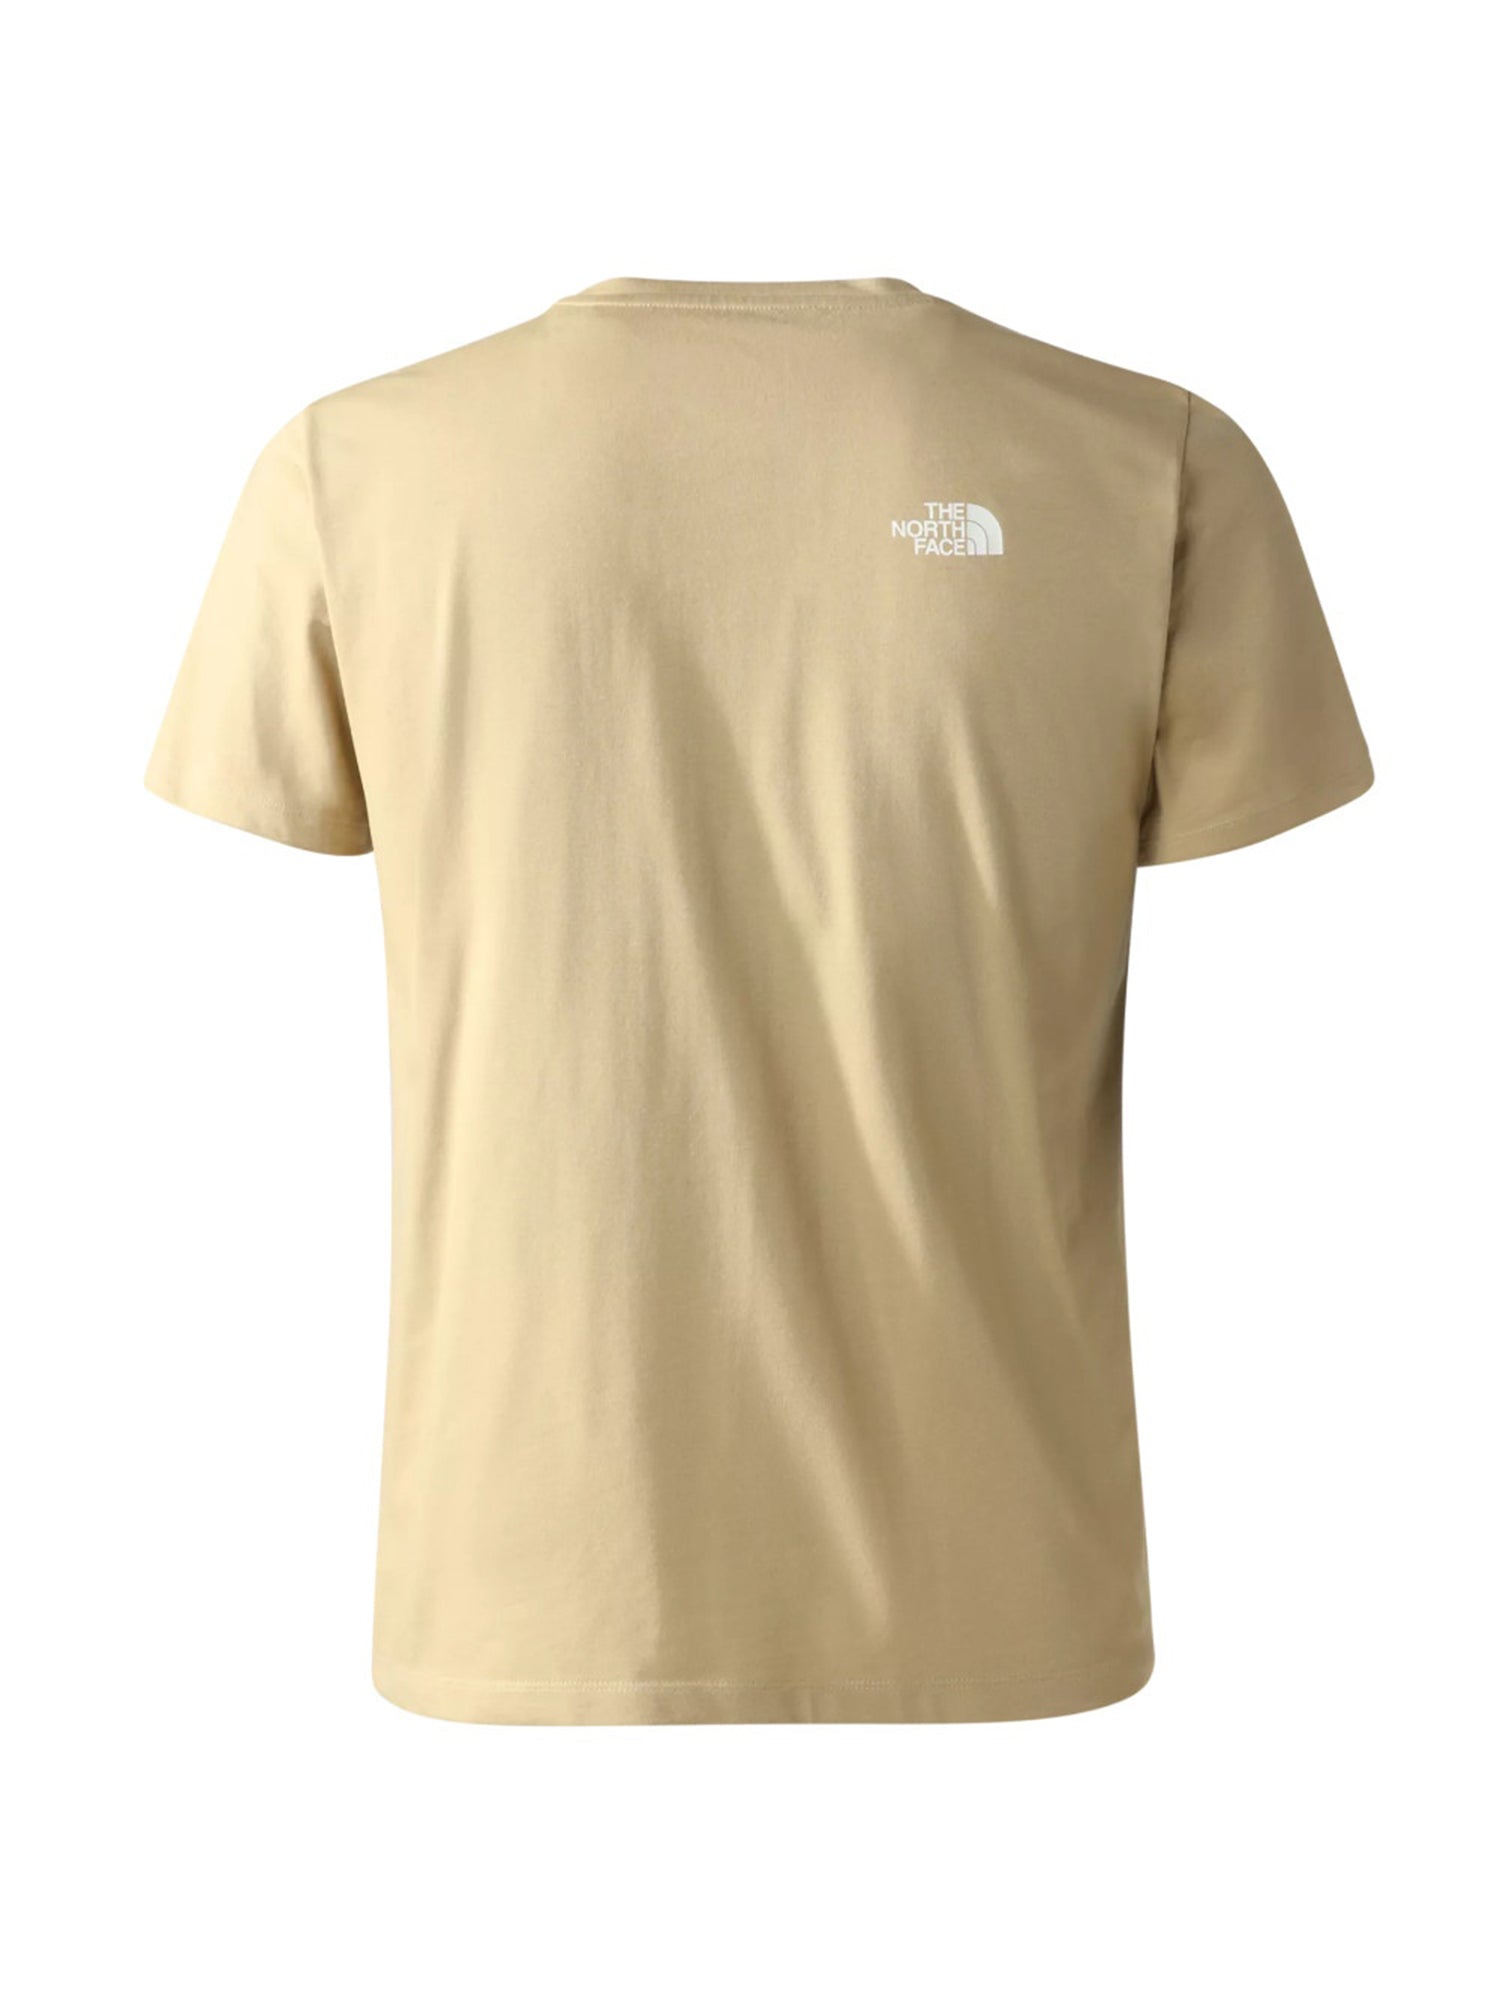 THE NORTH FACE T-SHIRT FOUNDATION GRAPHIC TEE KHAKI